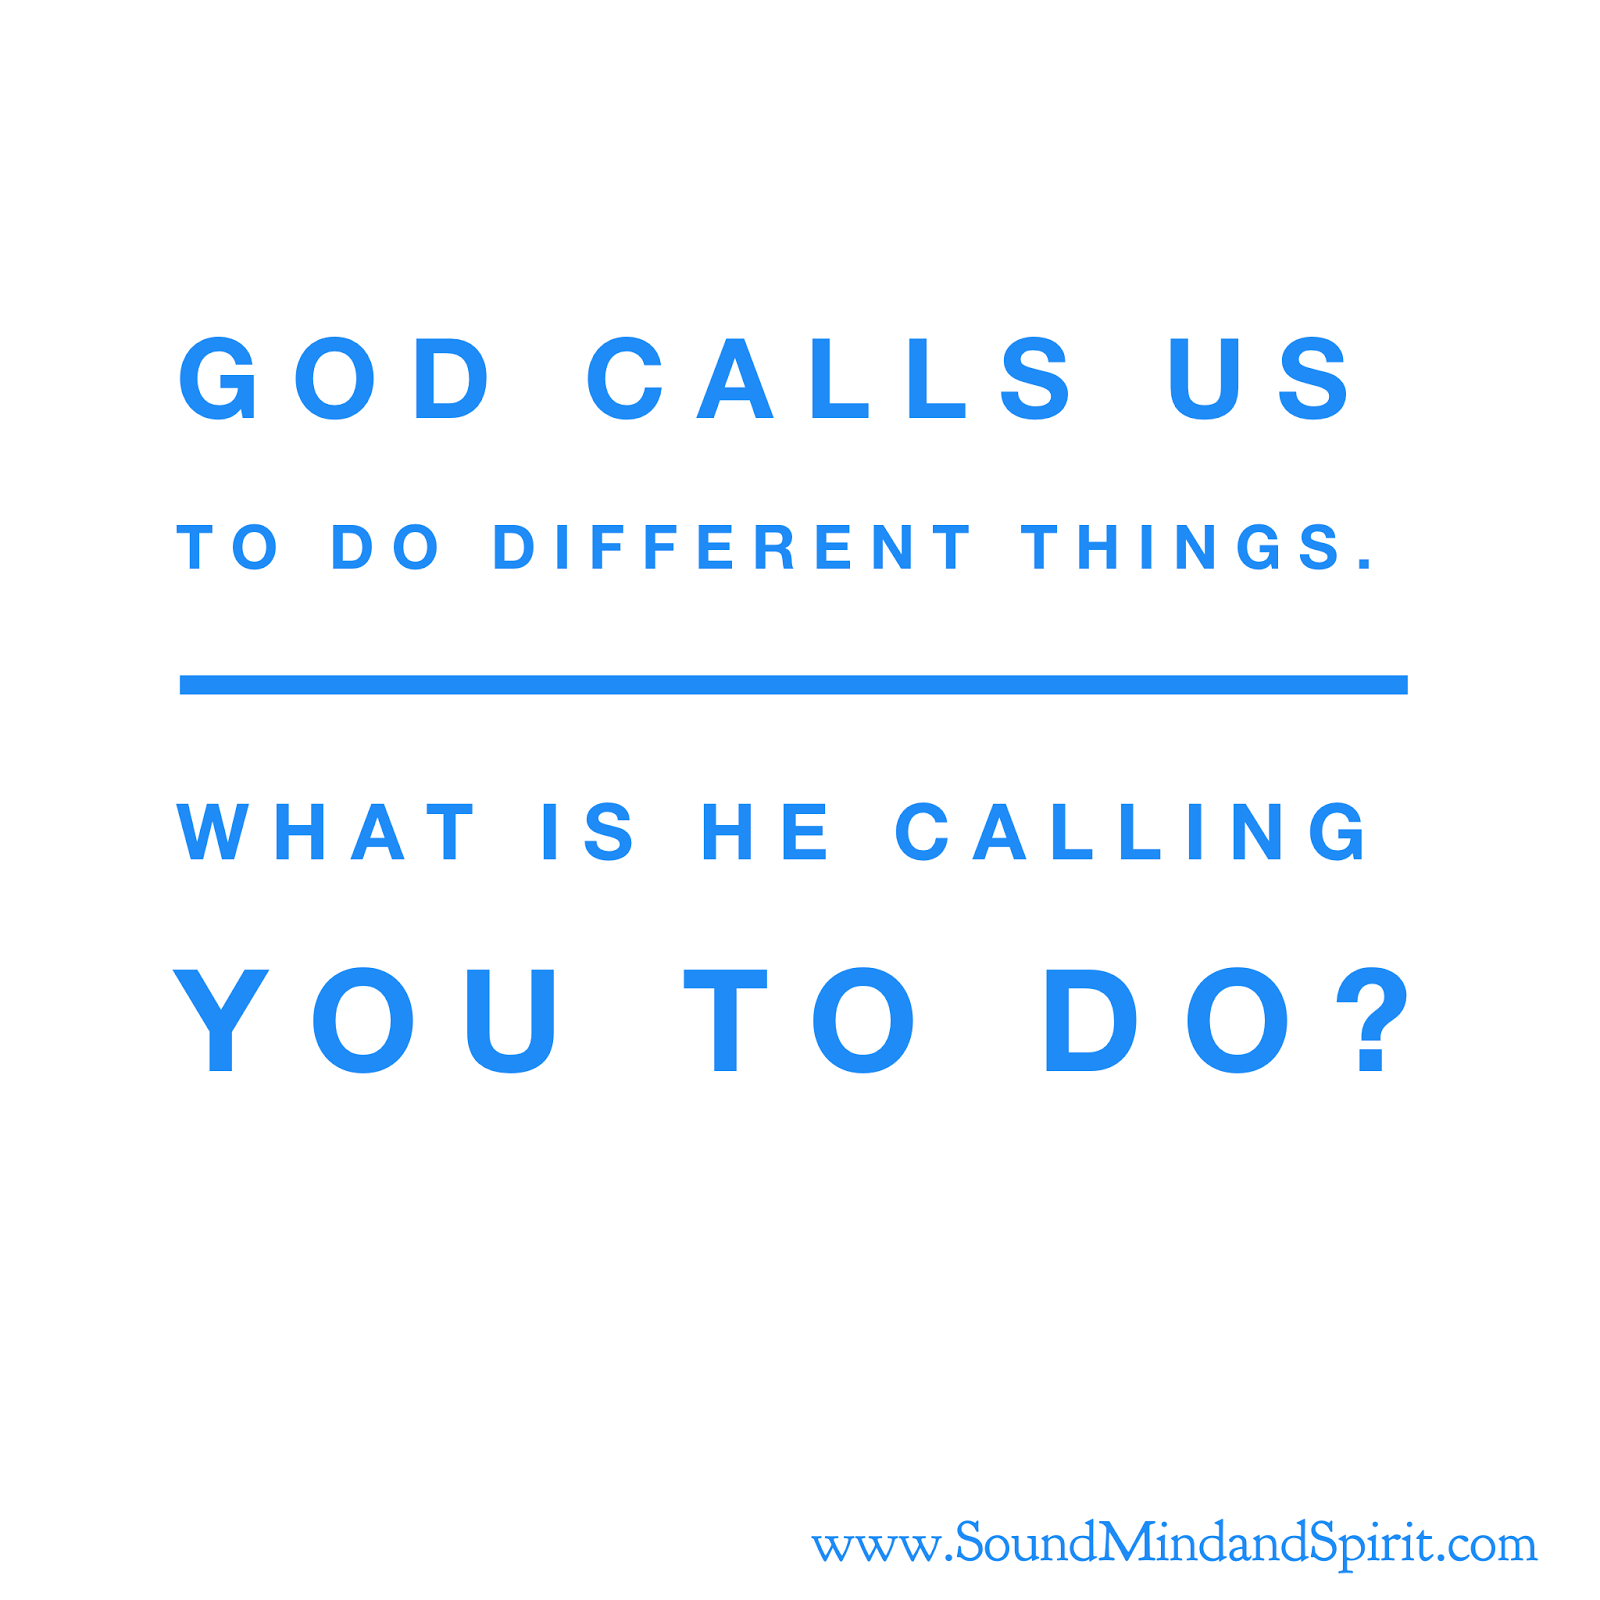 God calls us to do different things.  What is he calling you to do?